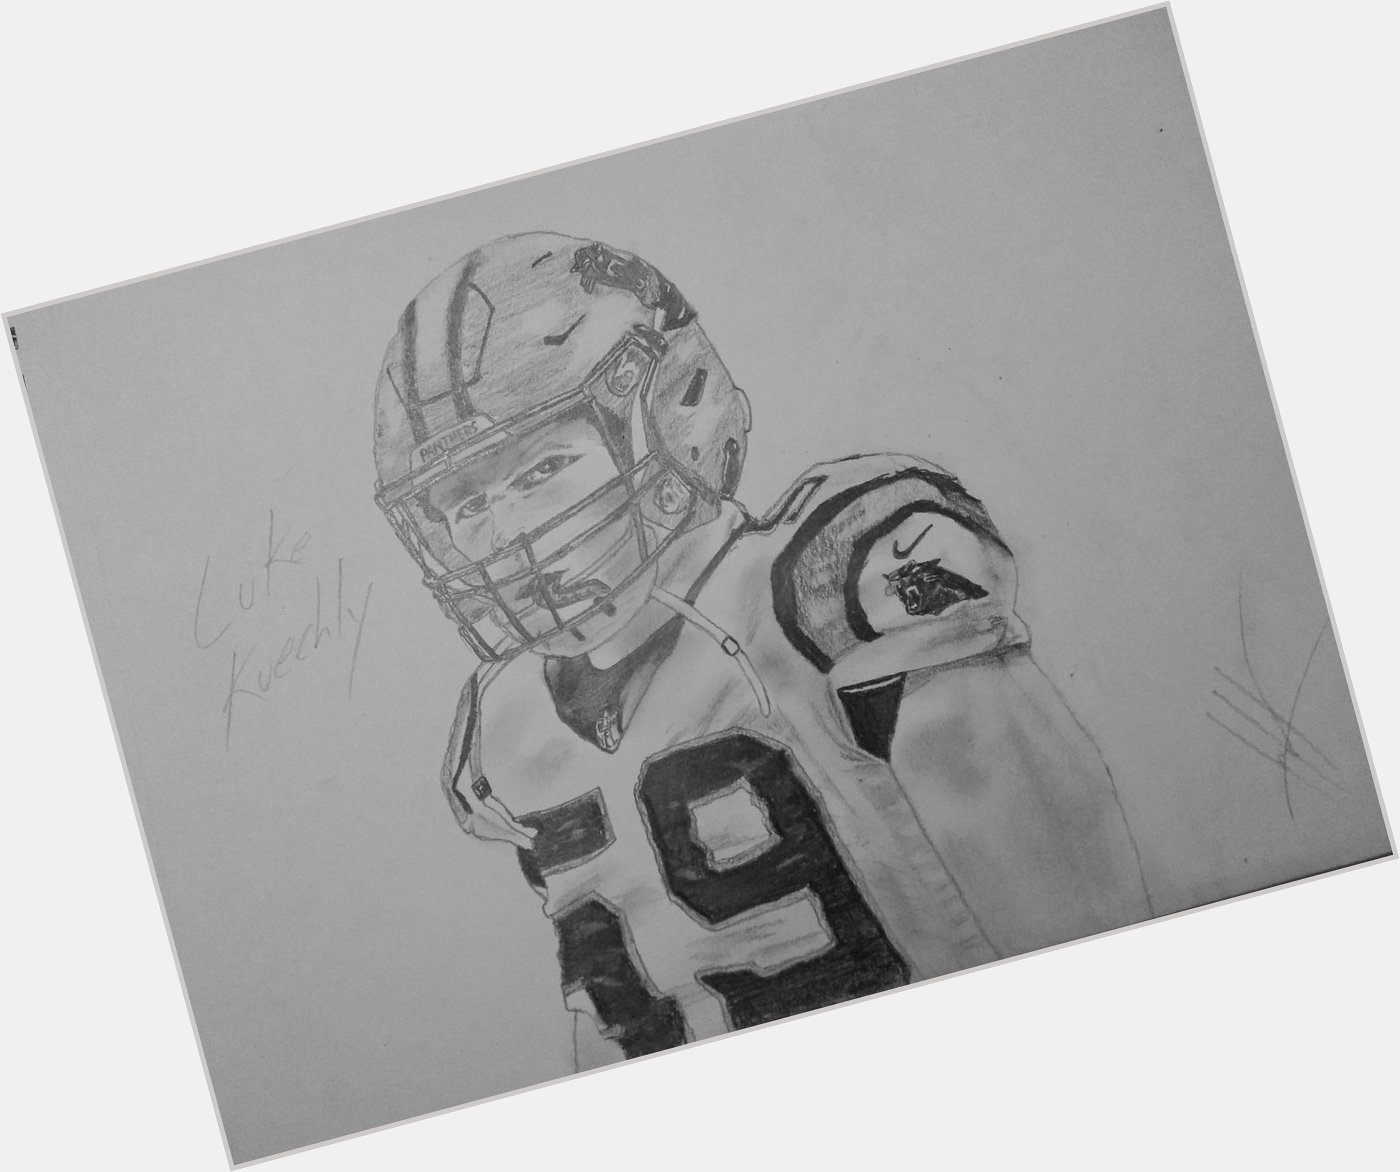 Just finished this drawing of Luke Kuechly. Happy Birthday 